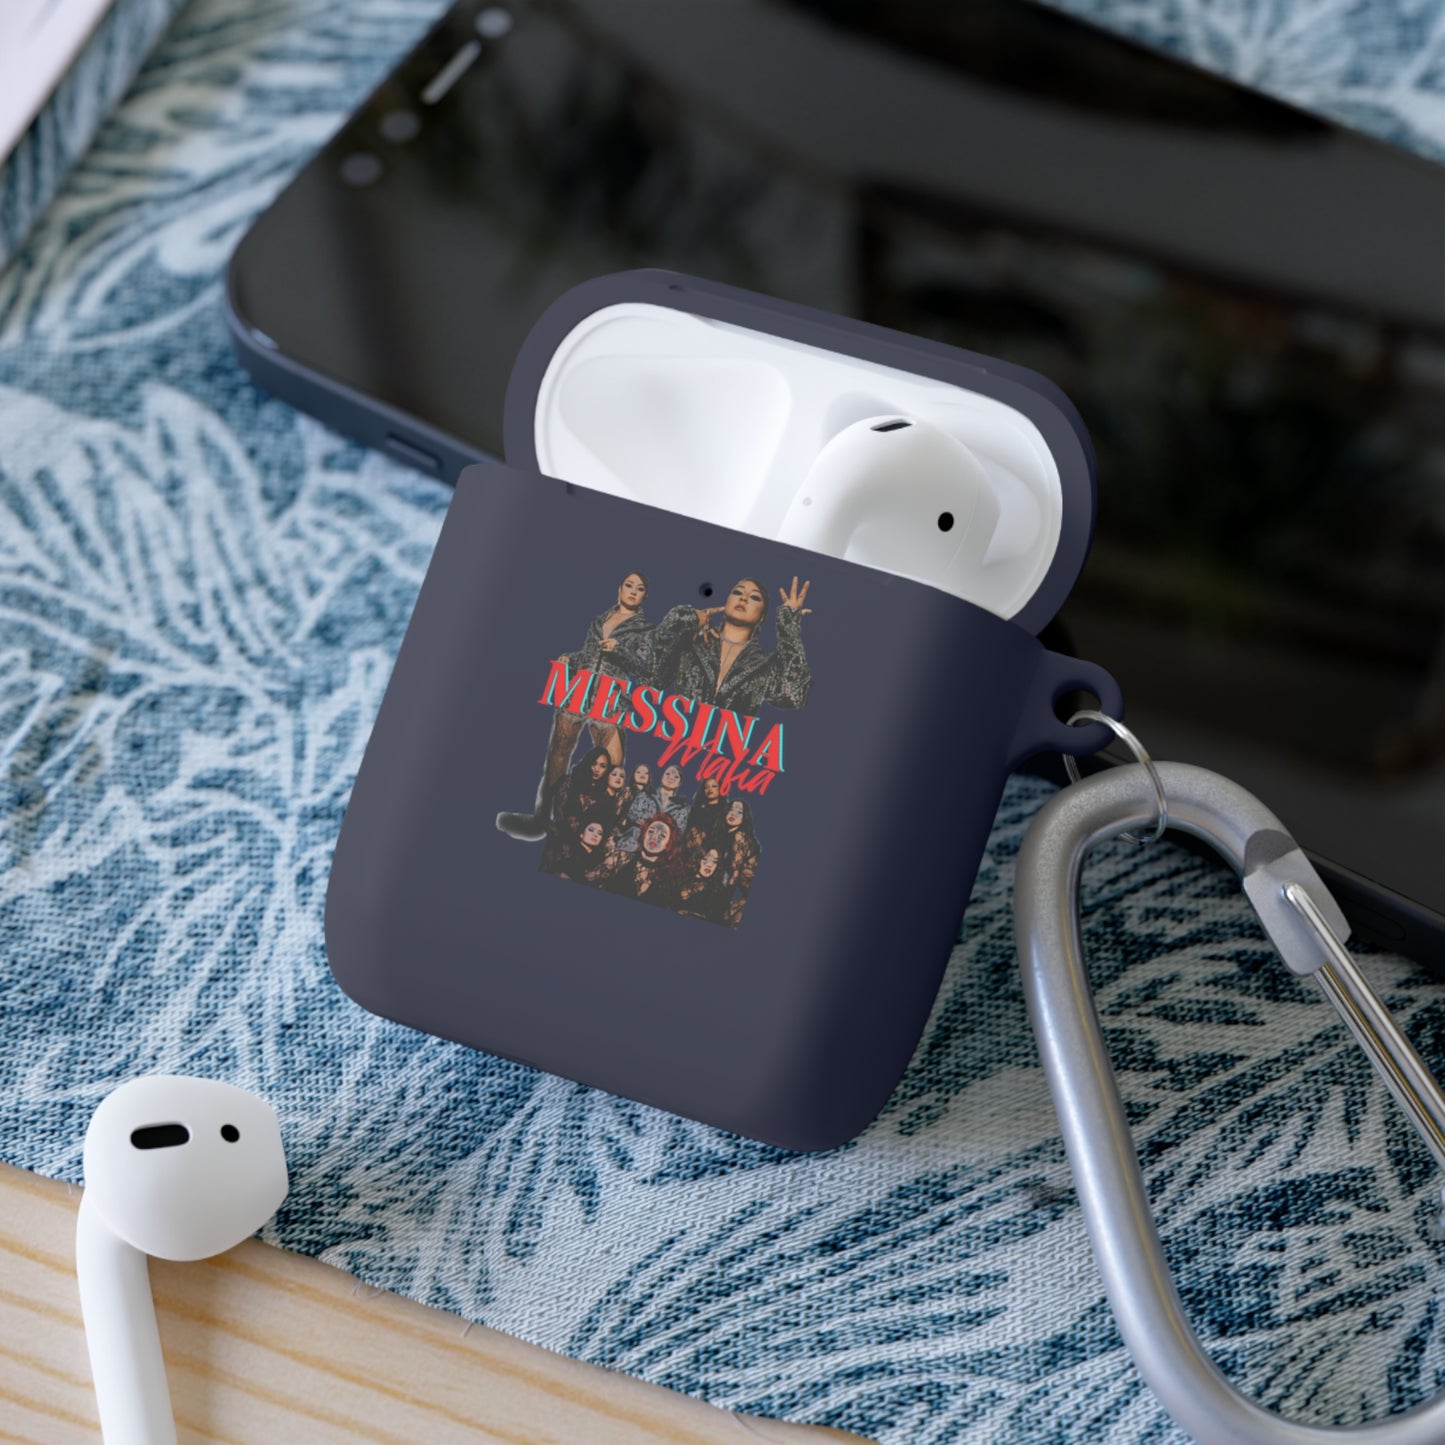 "Messina Mafia, Family is Everything" AirPods and AirPods Pro Case Cover